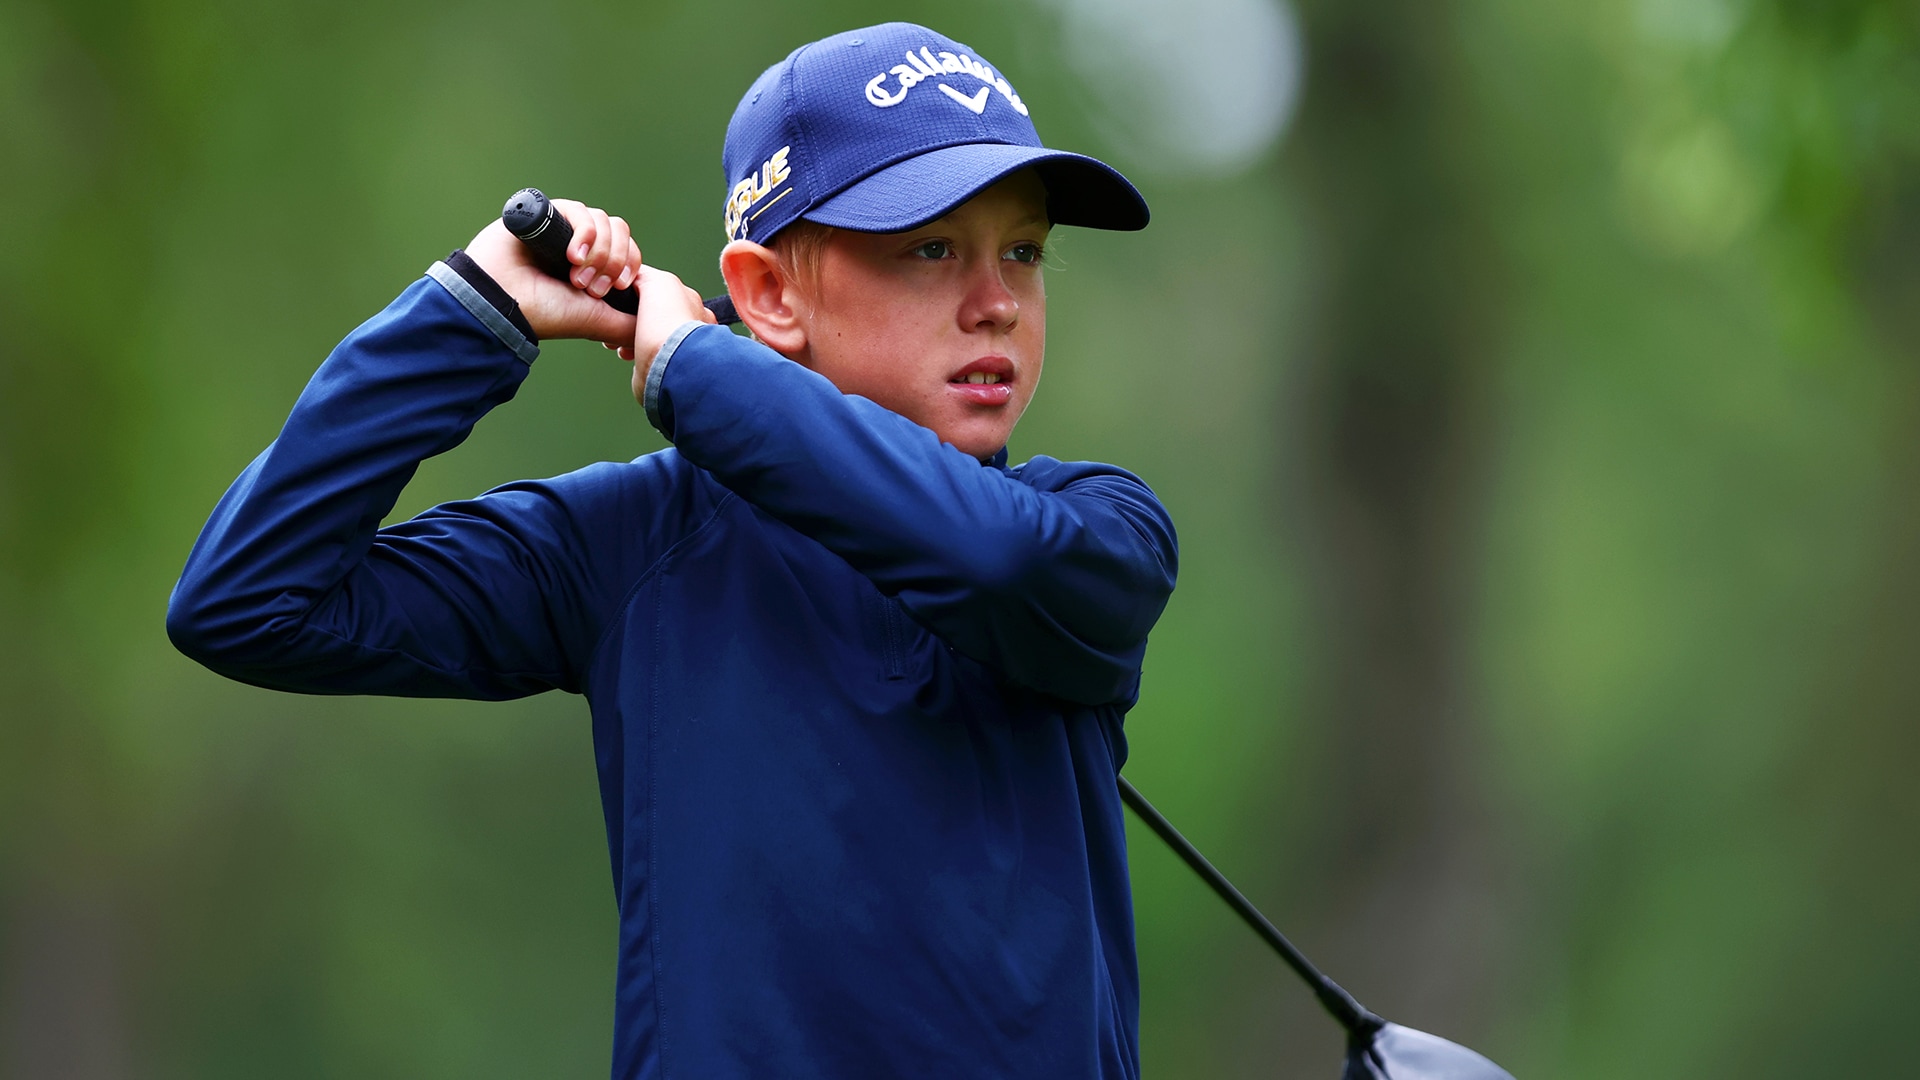 Annika Sorenstam on son’s PNC debut: ‘It’s his dream’ to play against Tiger, JT and Co.